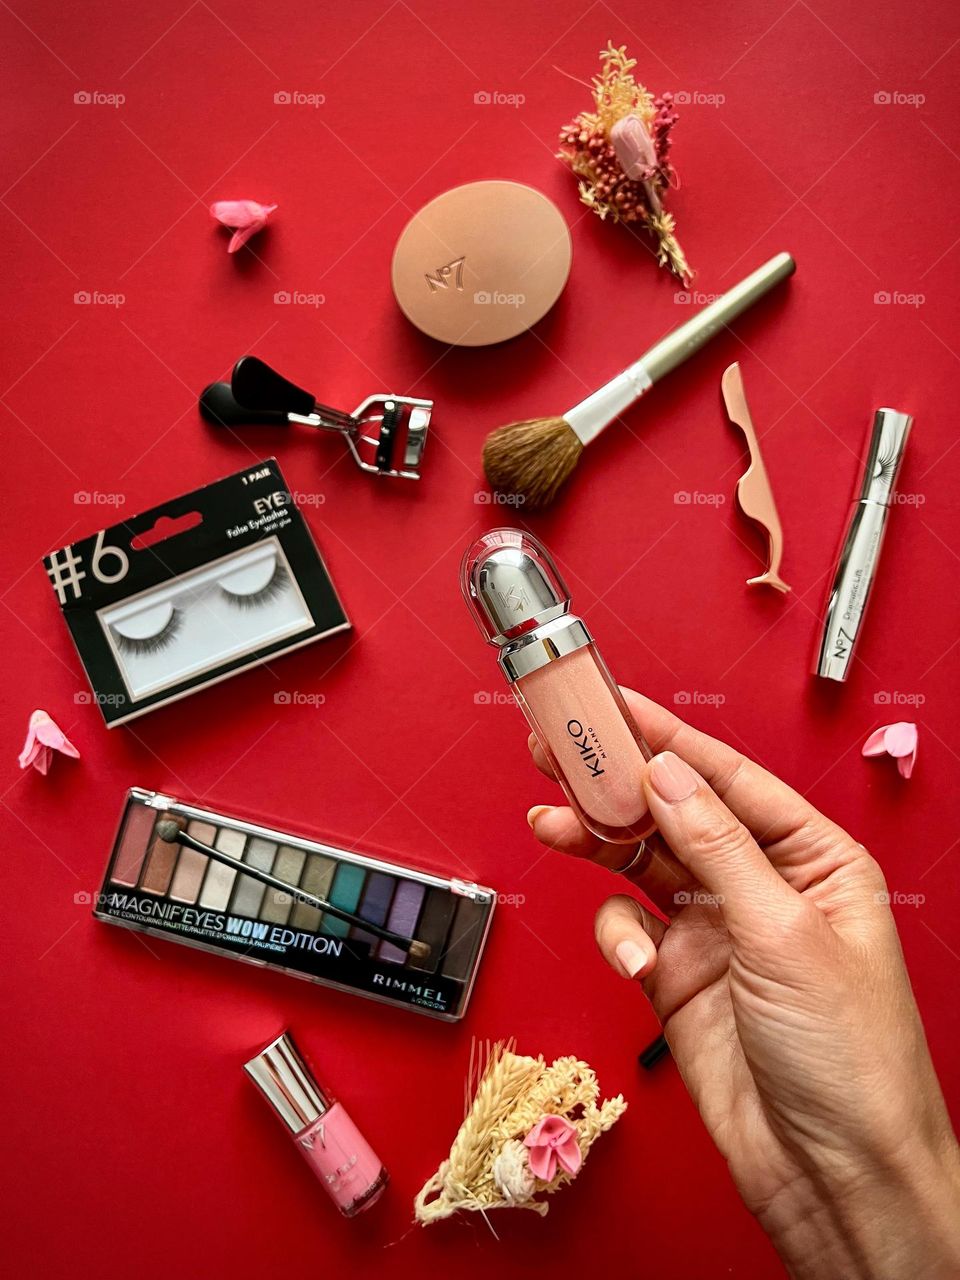 Decorating cosmetic, hand holding the lipgloss, beauty brands.